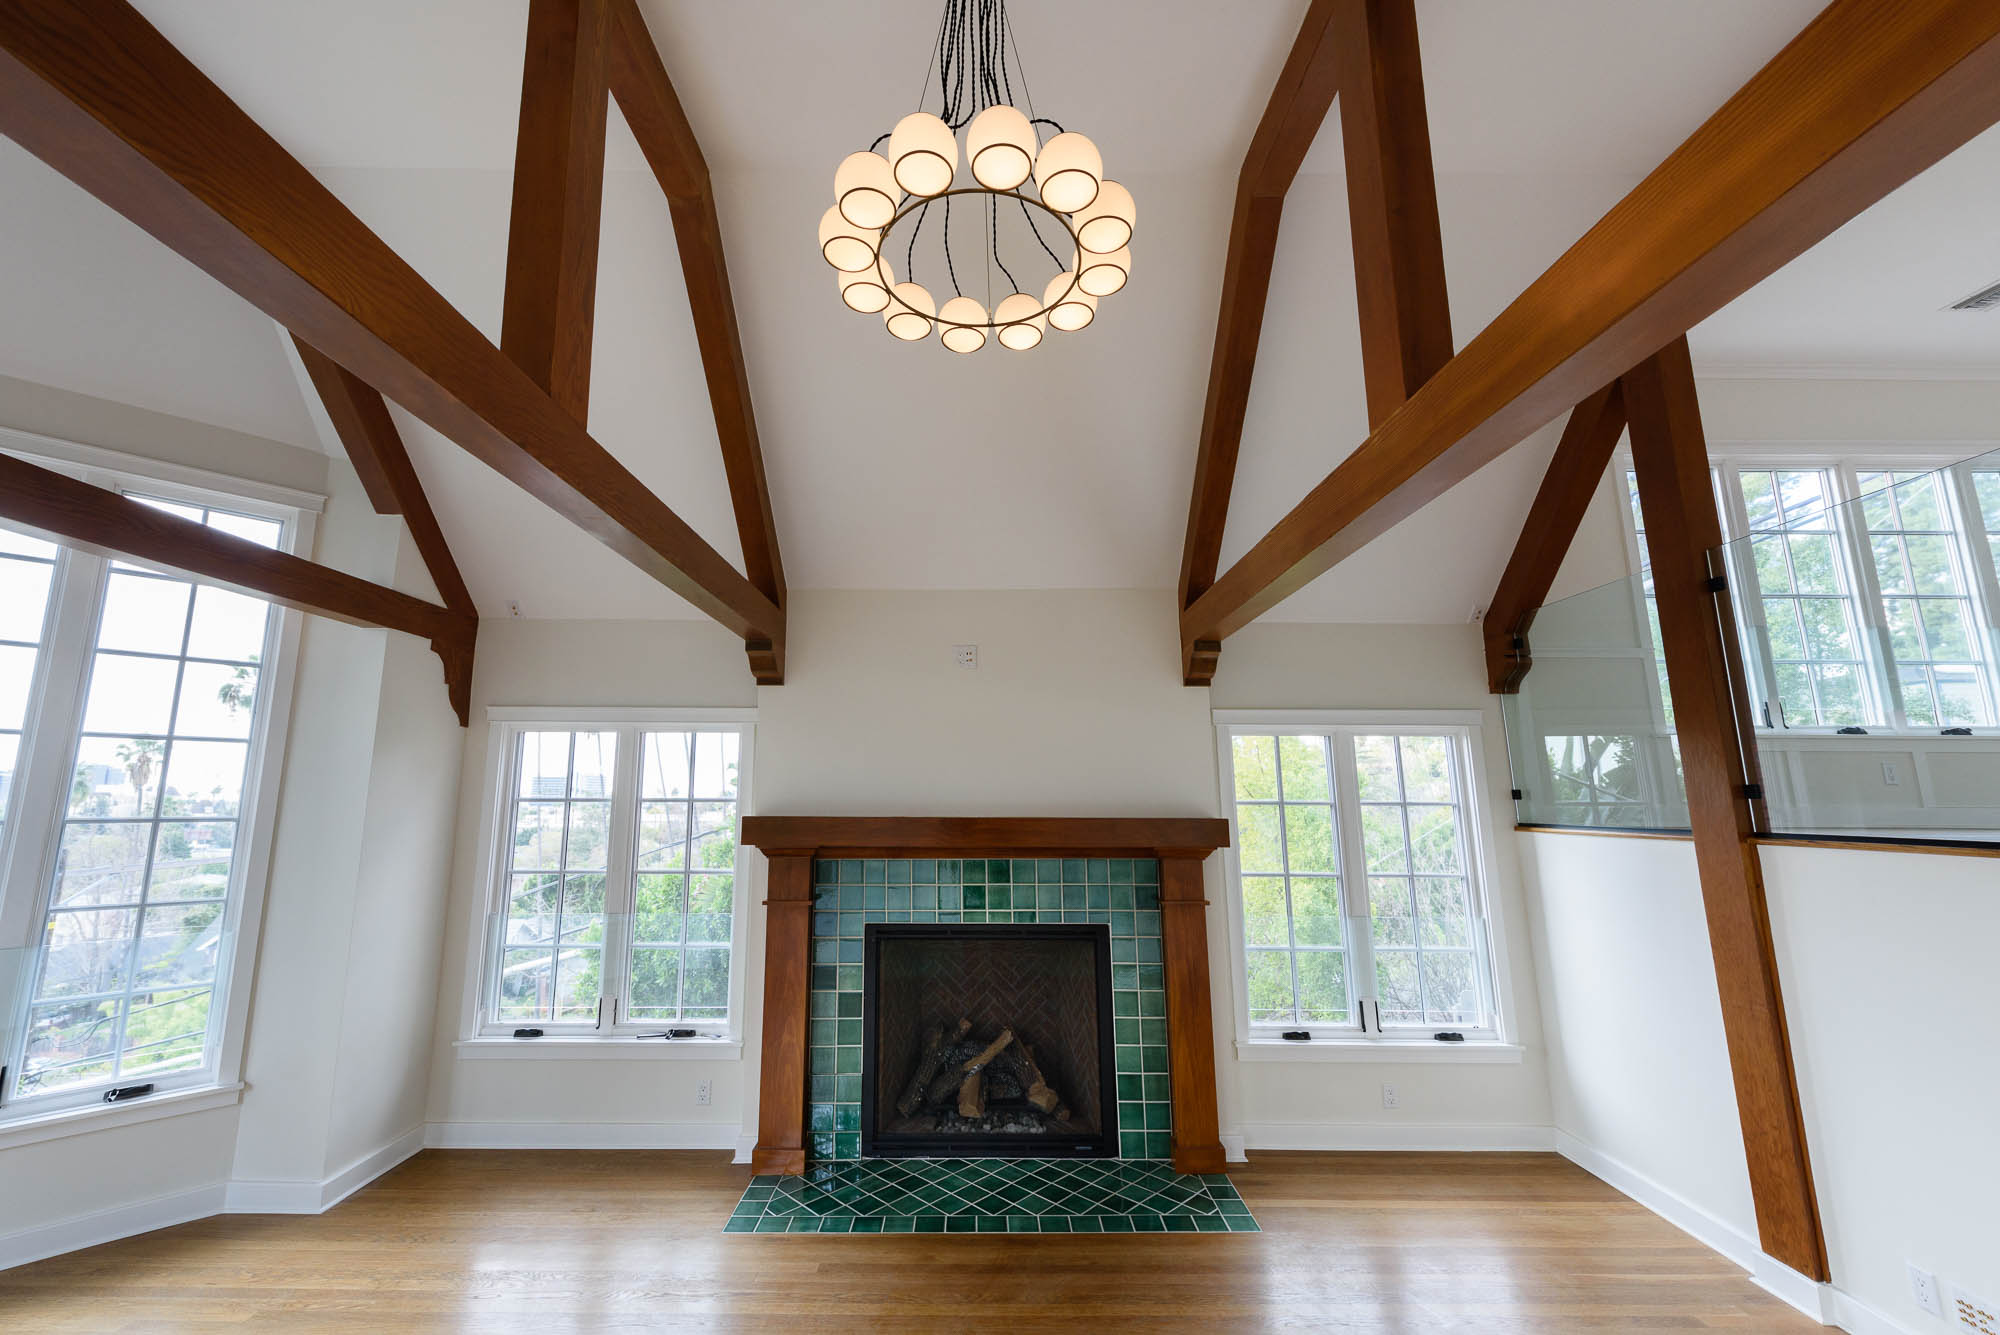  Stunning airy and open with high vaulted ceiling and wood beams • Solid light oak floors 